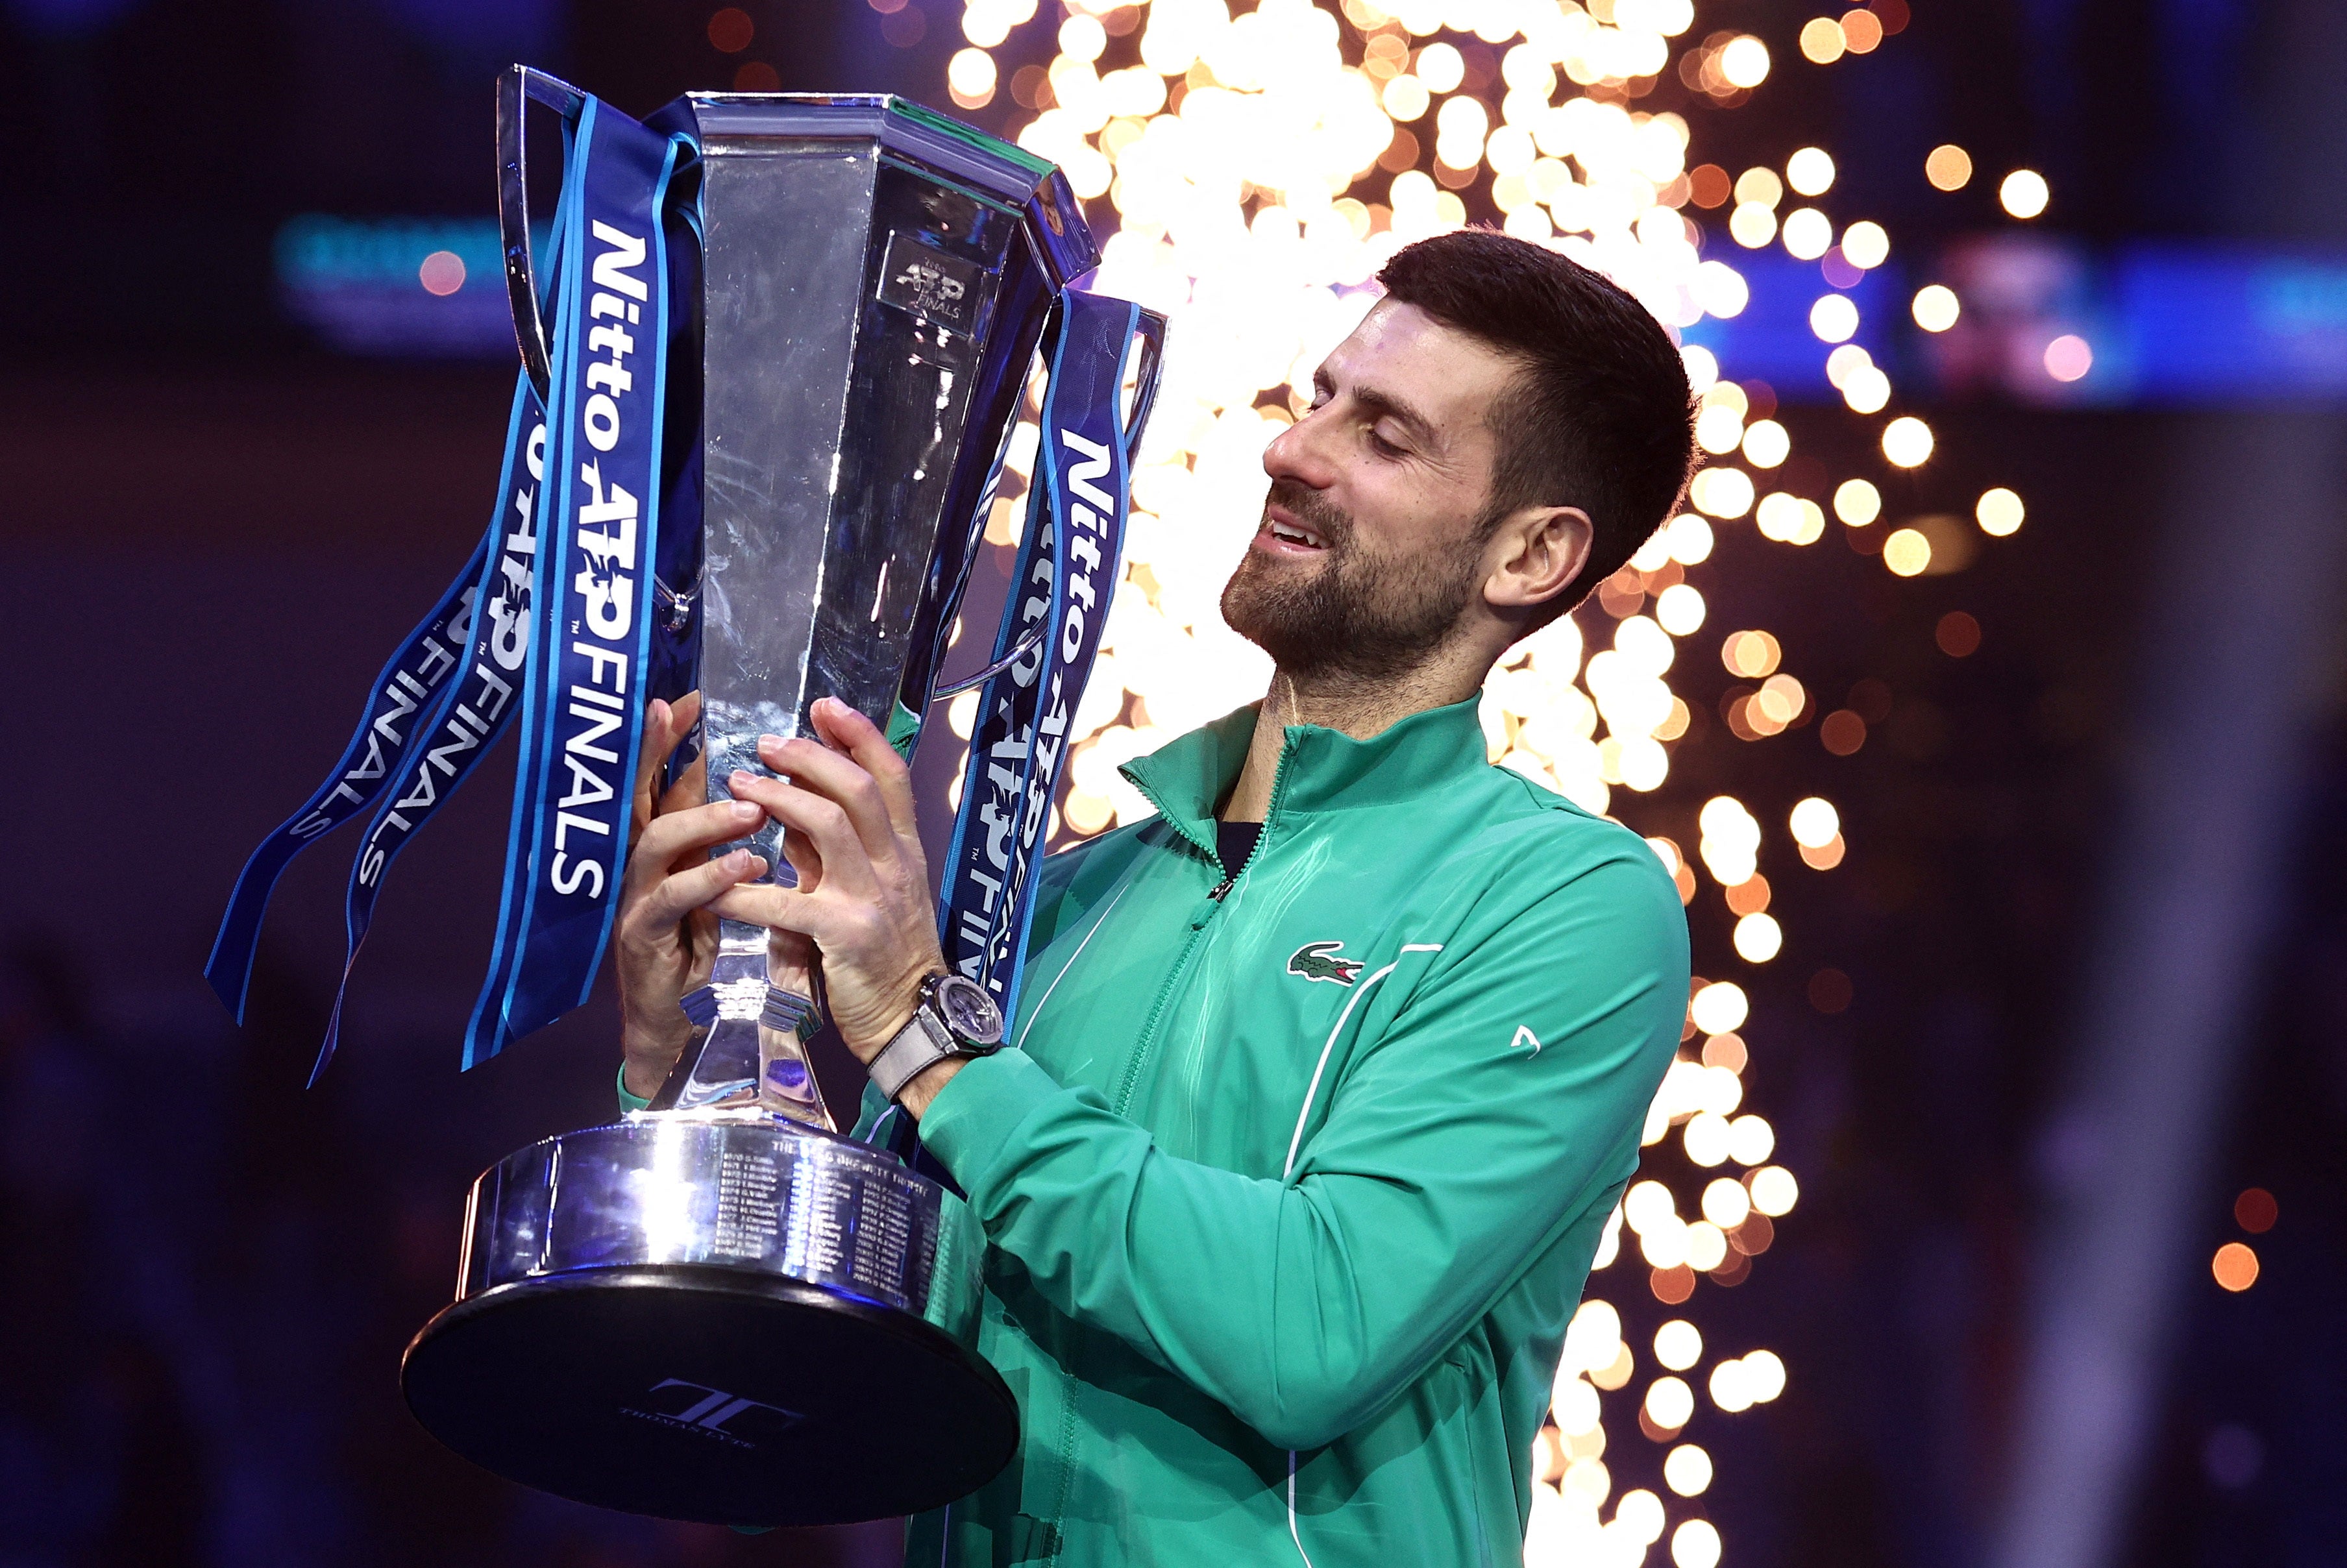 Djokovic celebrates with a trophy after winning the ATP Finals